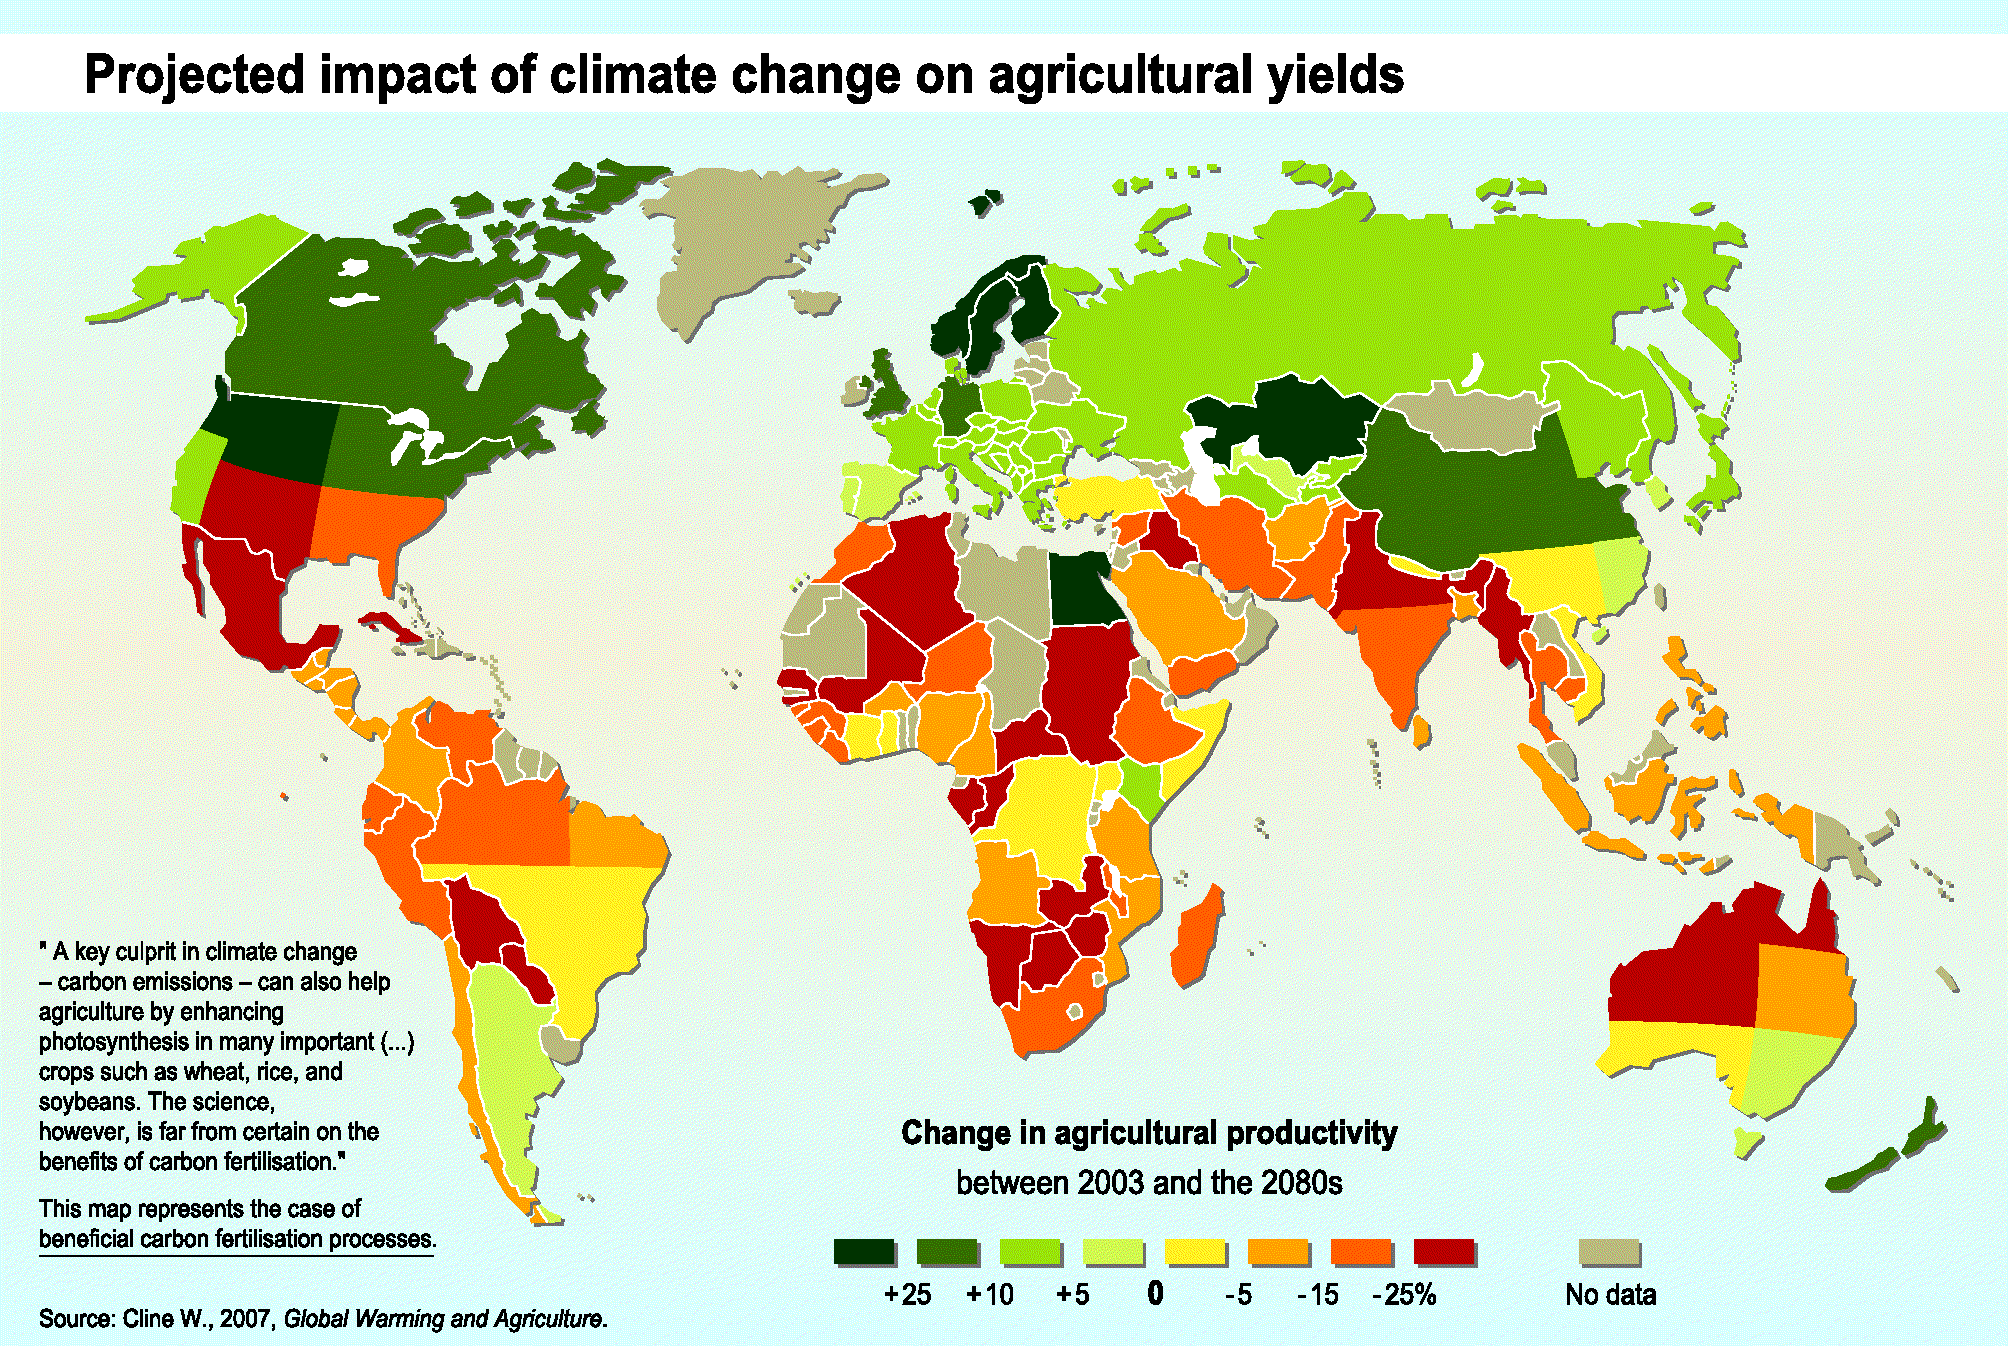 climate change map of the world Projected Impact Of Climate Change On Agricultural Yields climate change map of the world